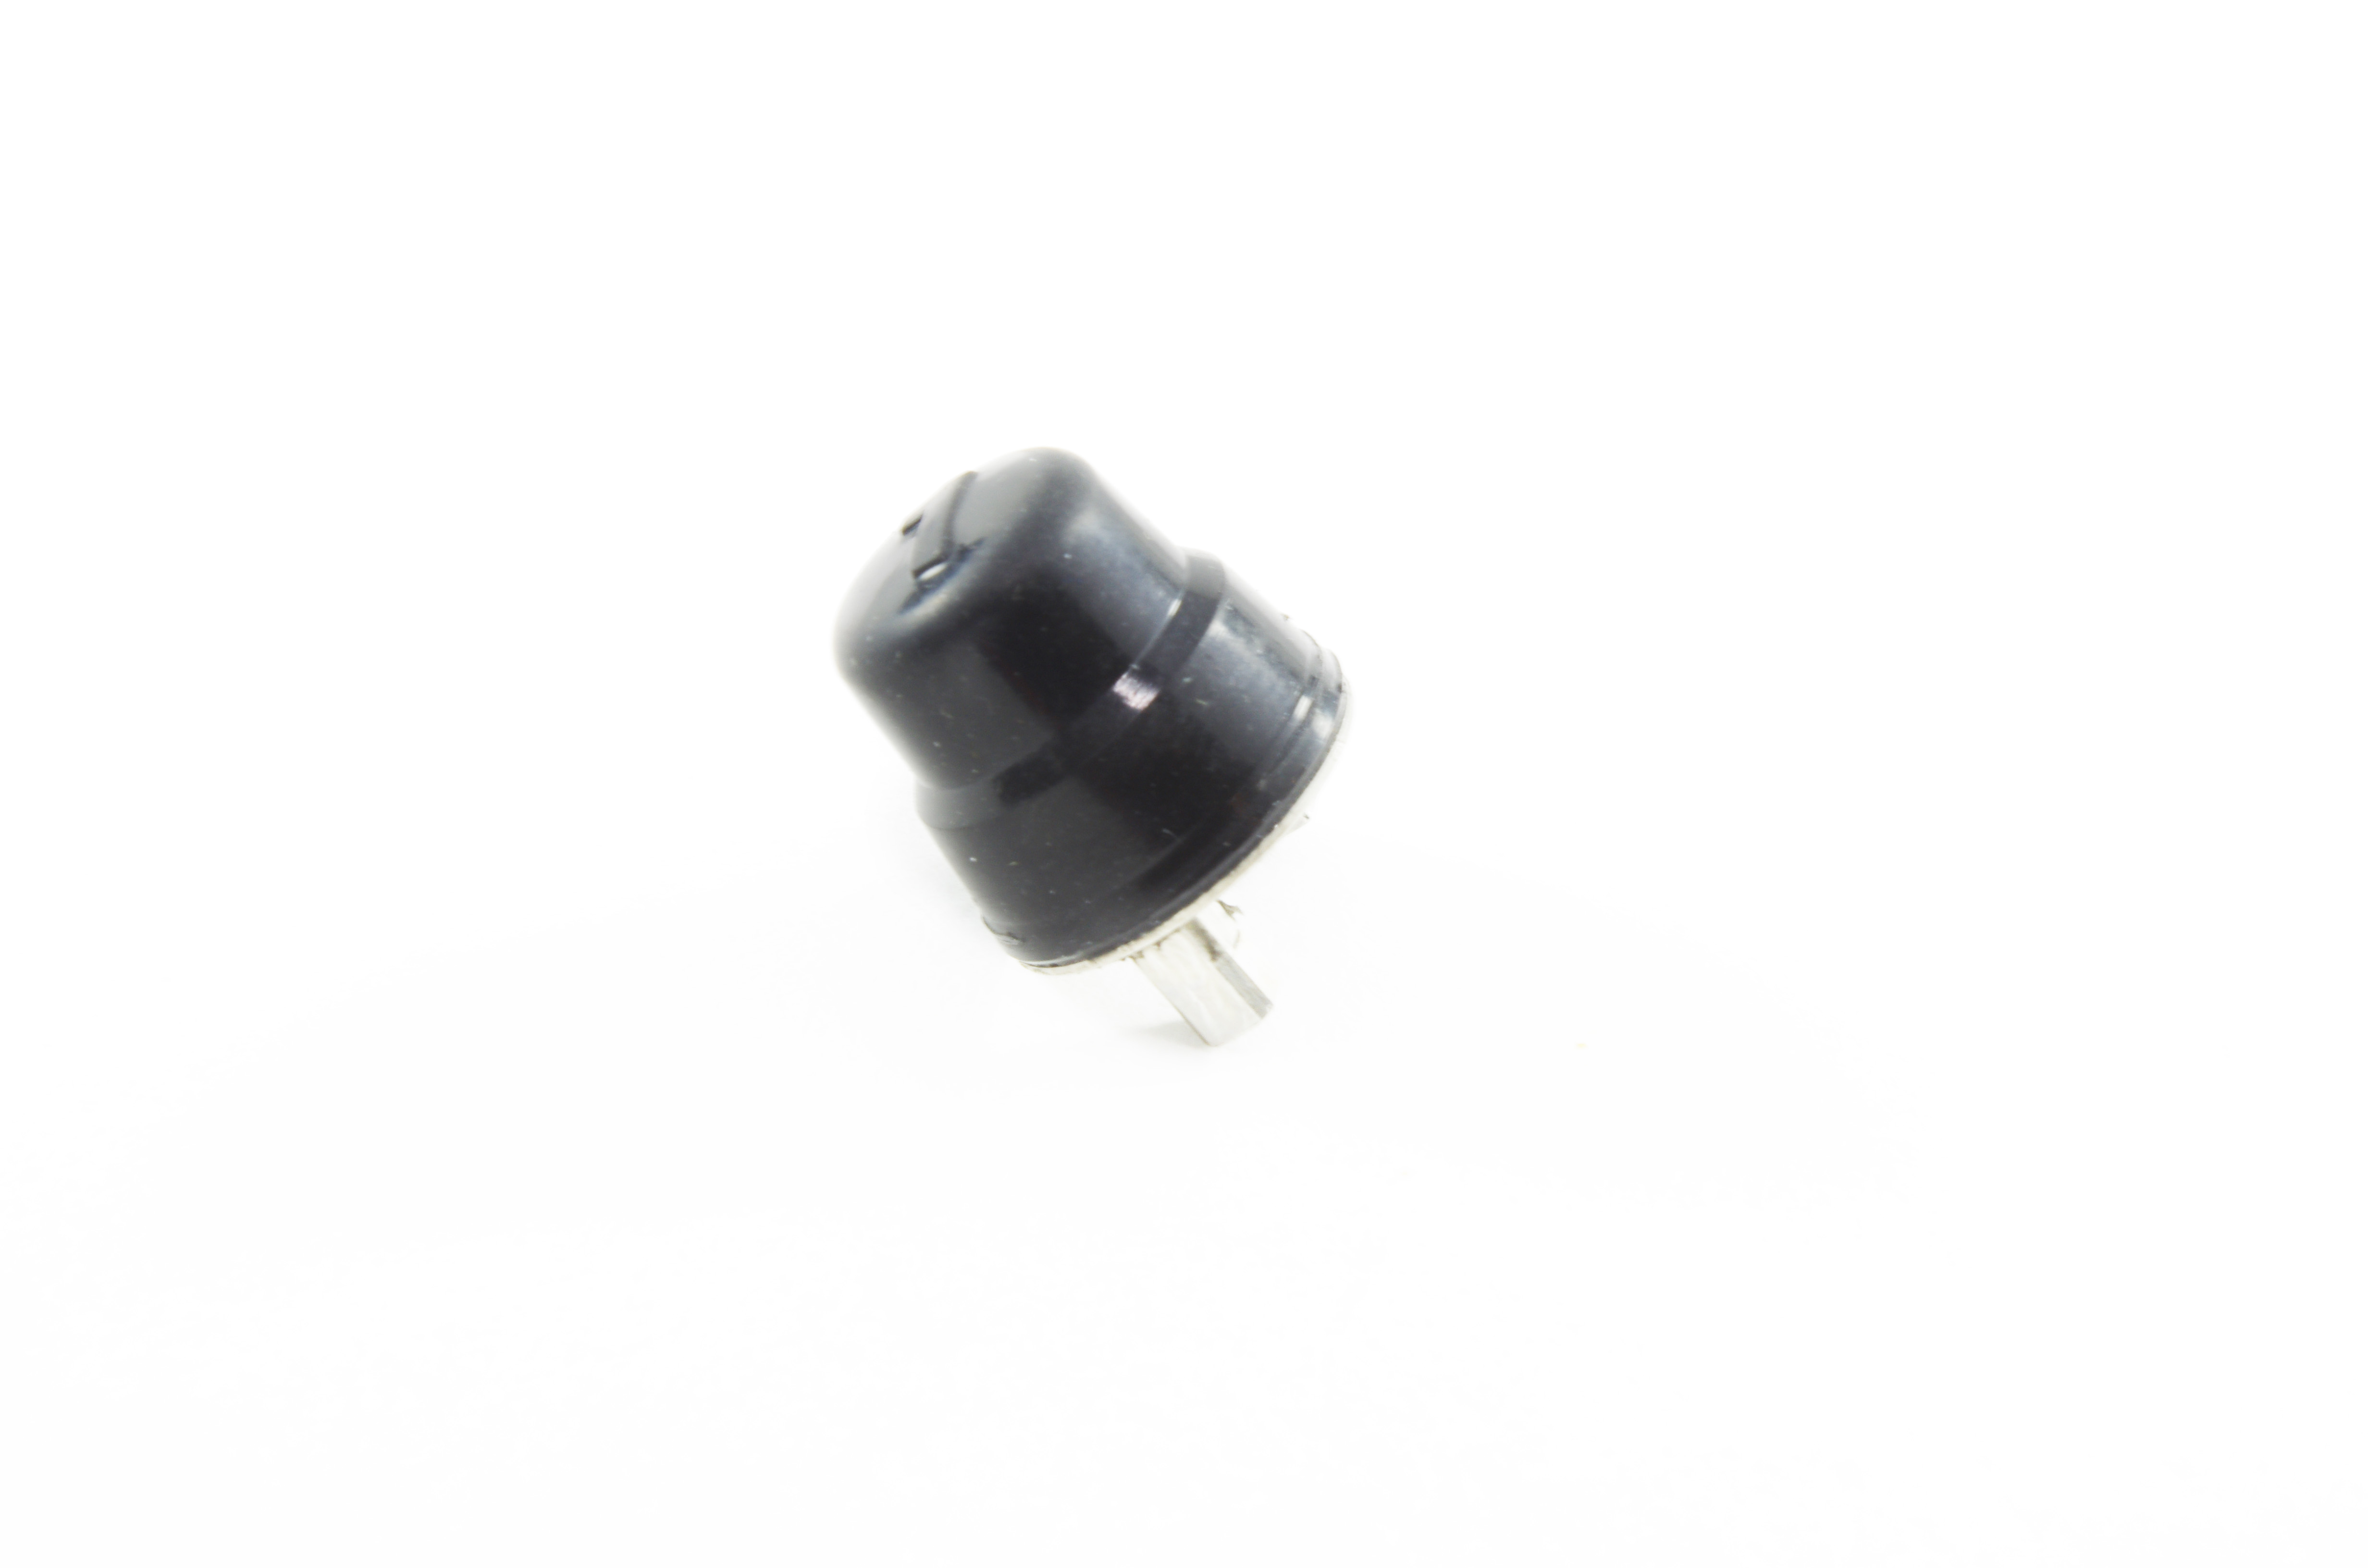 OEM Number One Button - 140, 160, 180, 260, 190, 290 Series